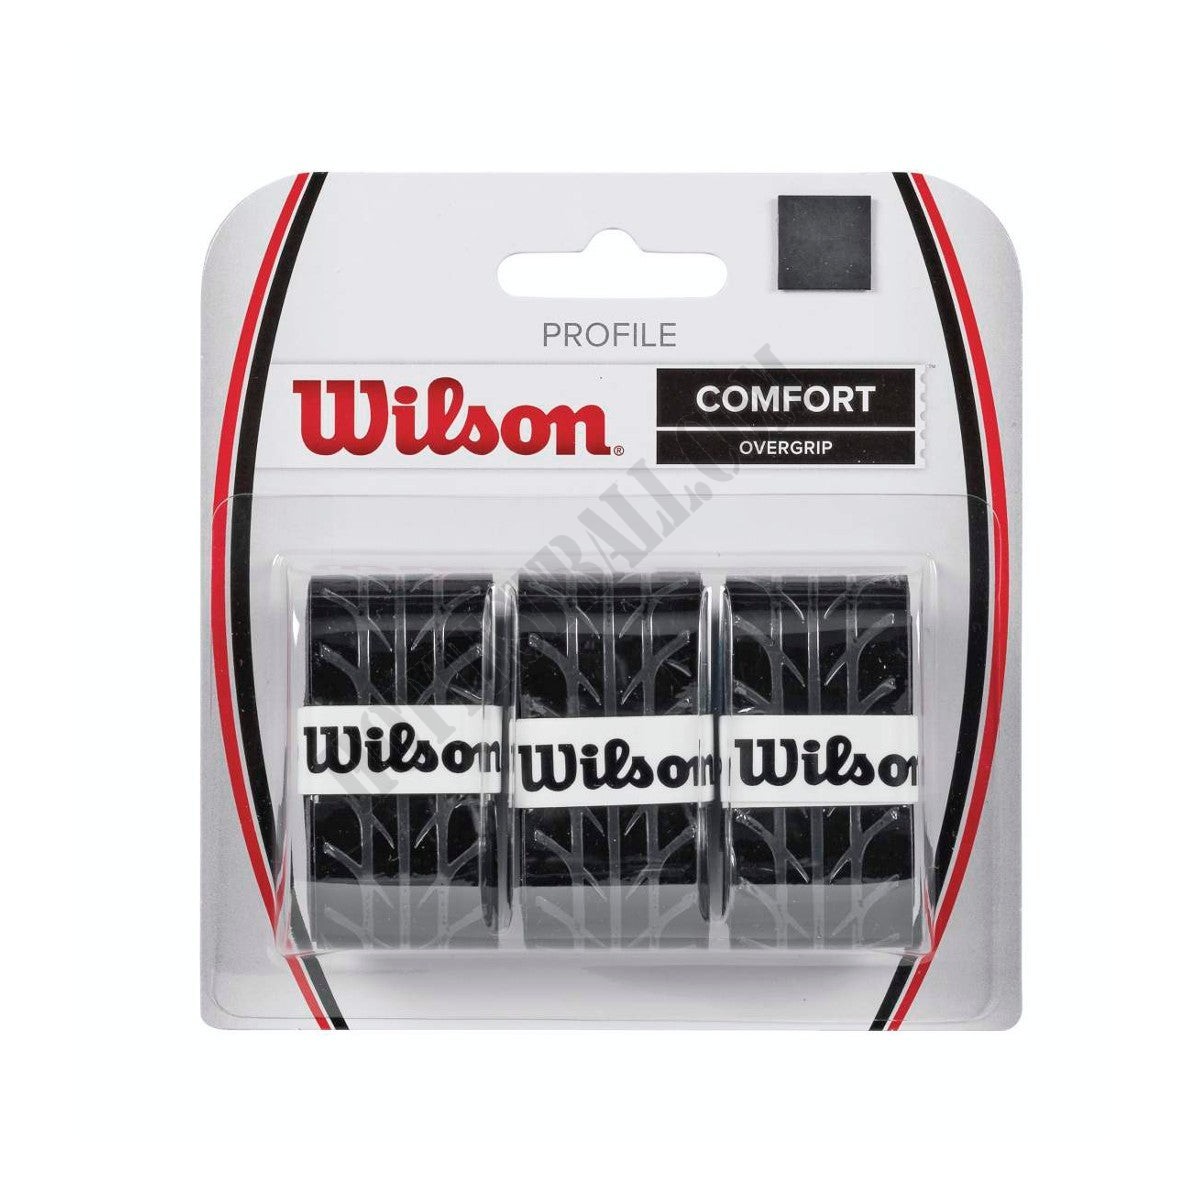 Profile Overgrip, 3 Pack - Wilson Discount Store - -0